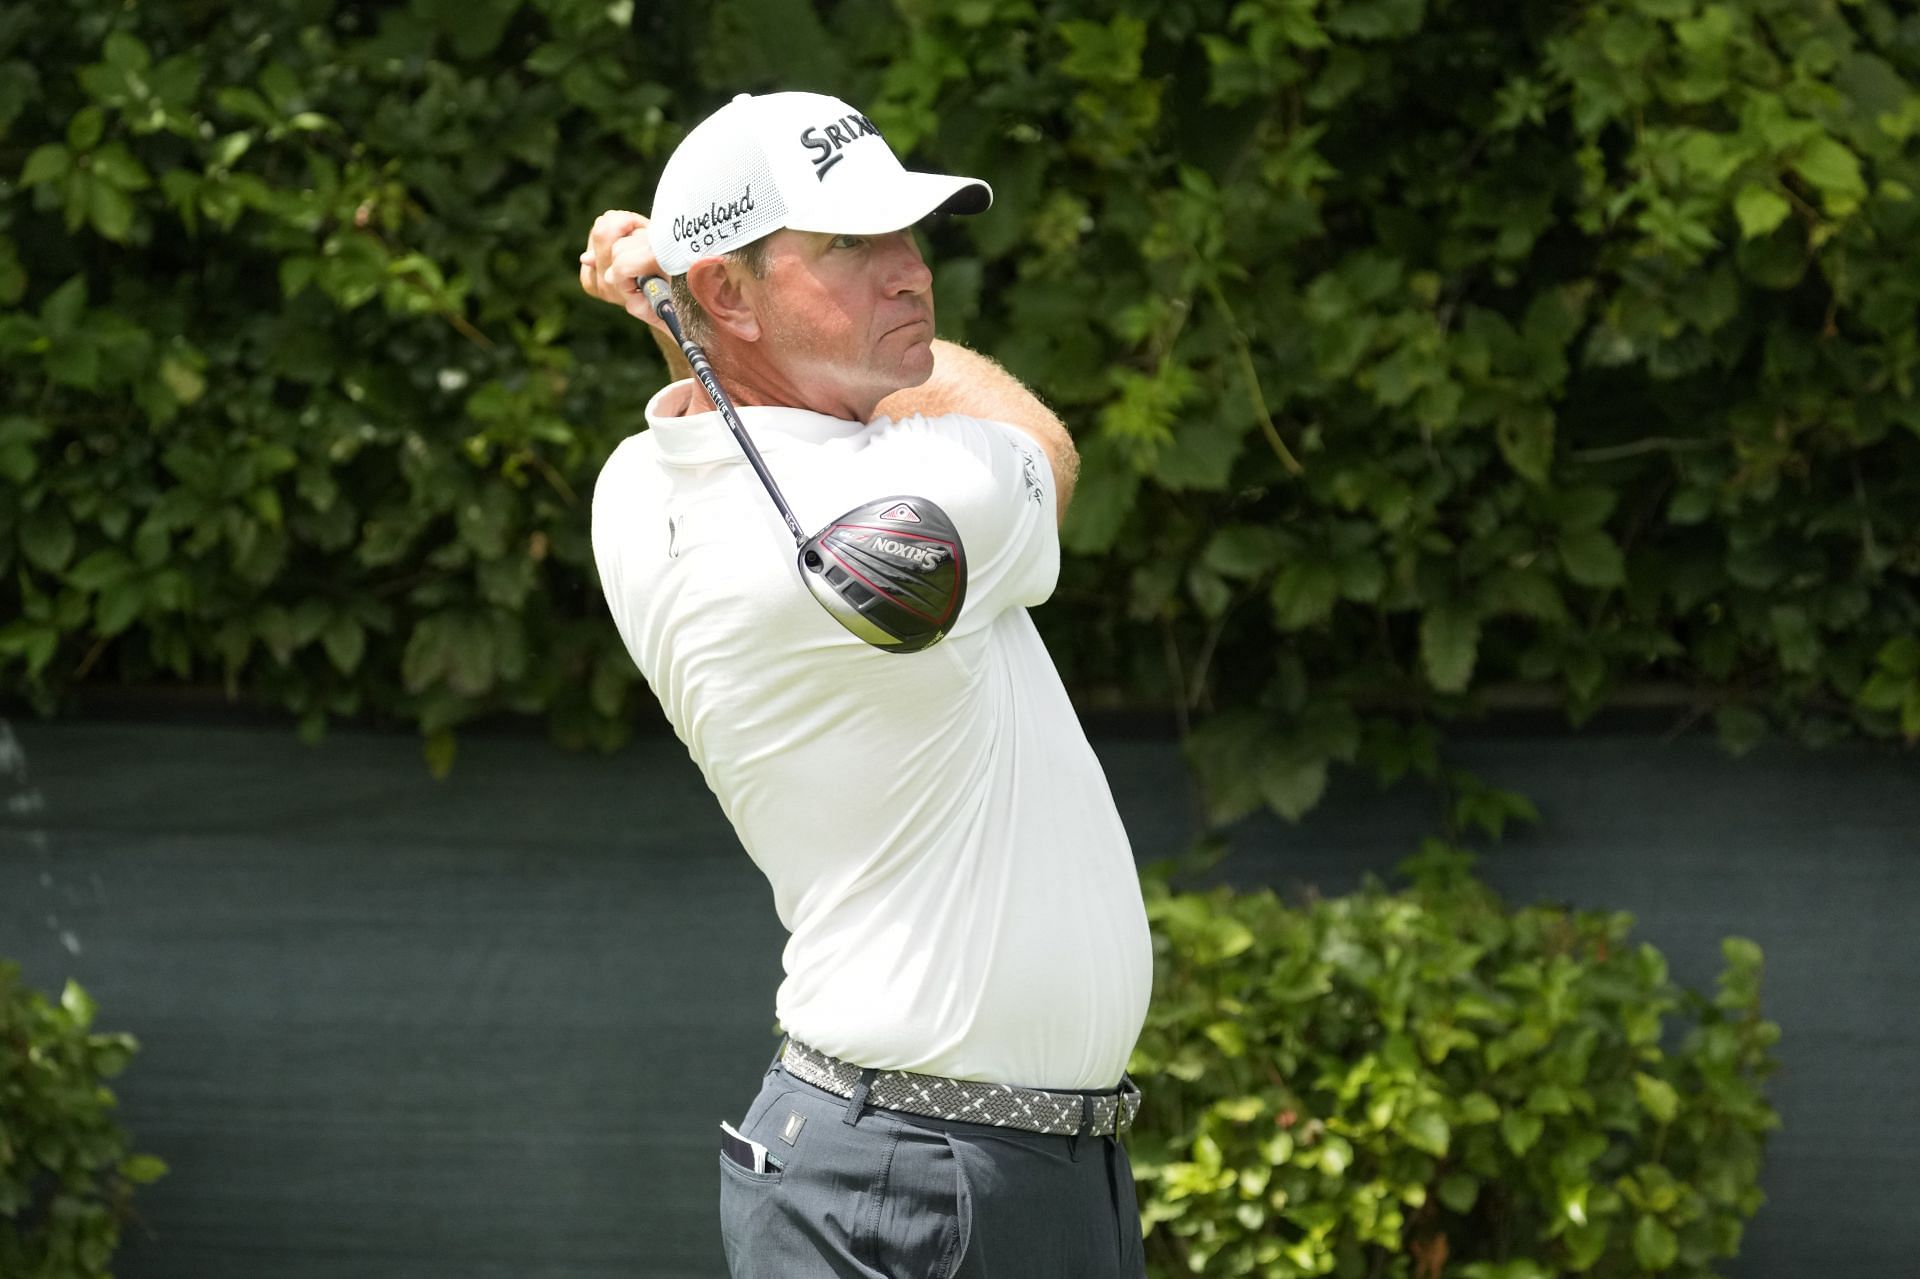 Lucas Glover at the BMW Championship (Image via Getty)